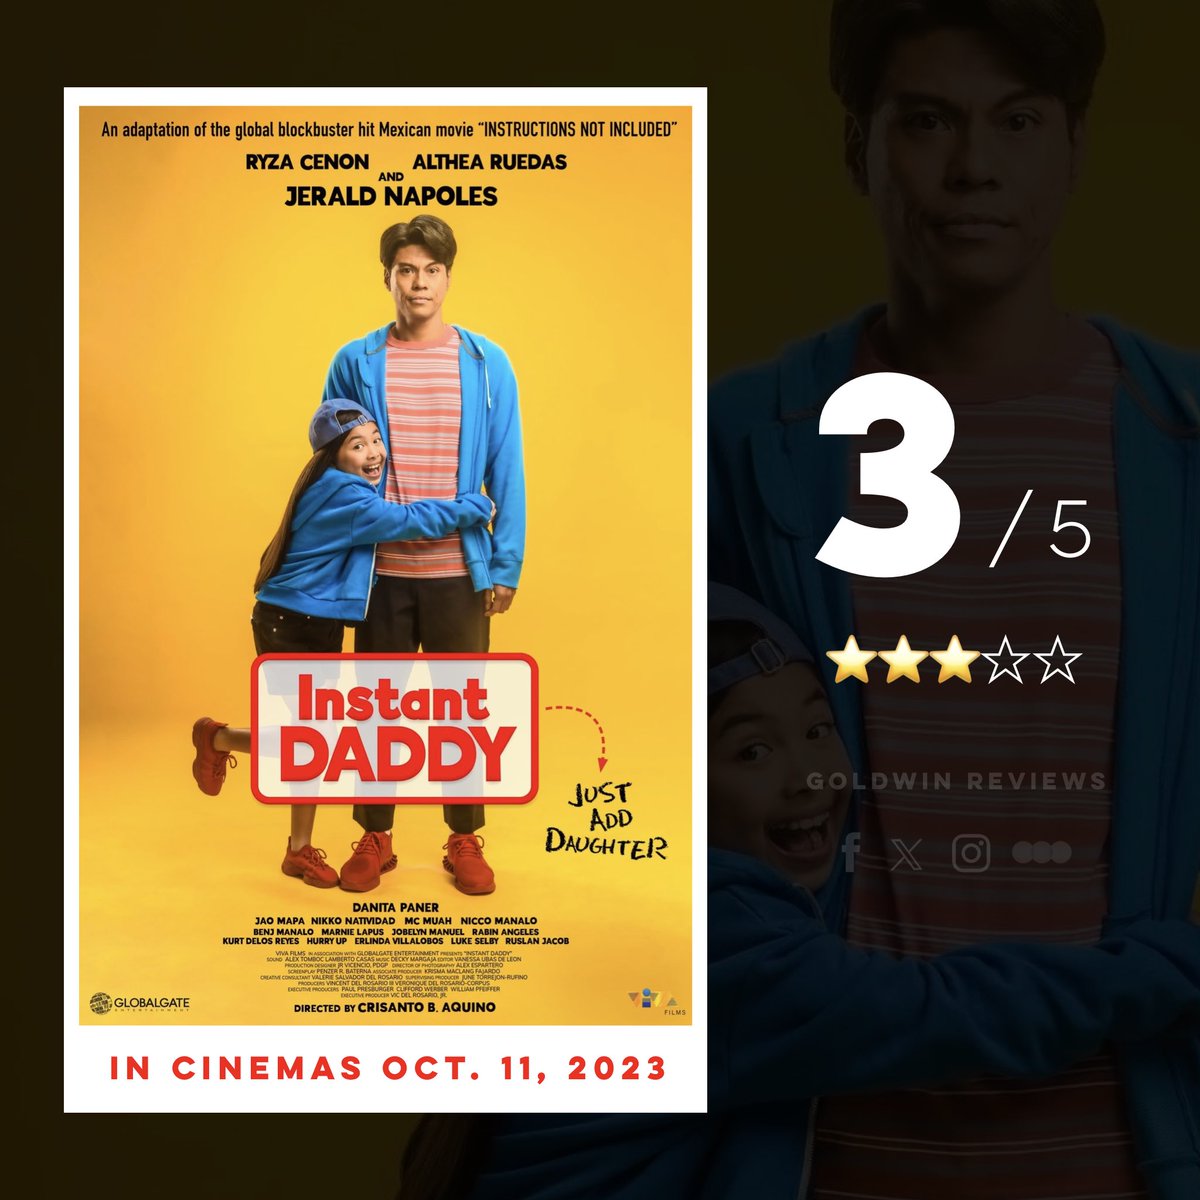 “This movie can make you smile, laugh and cry in an instant.”

Instant Daddy (2023)
Directed by: Crisanto Aquino

Philippine adaptation of Mexican film “Instructions Not Included”

- A MOVIE REVIEW THREAD -

#JeraldNapoles #AltheaRuedas #RyzaCenon #DanitaPaner #InstantDaddy